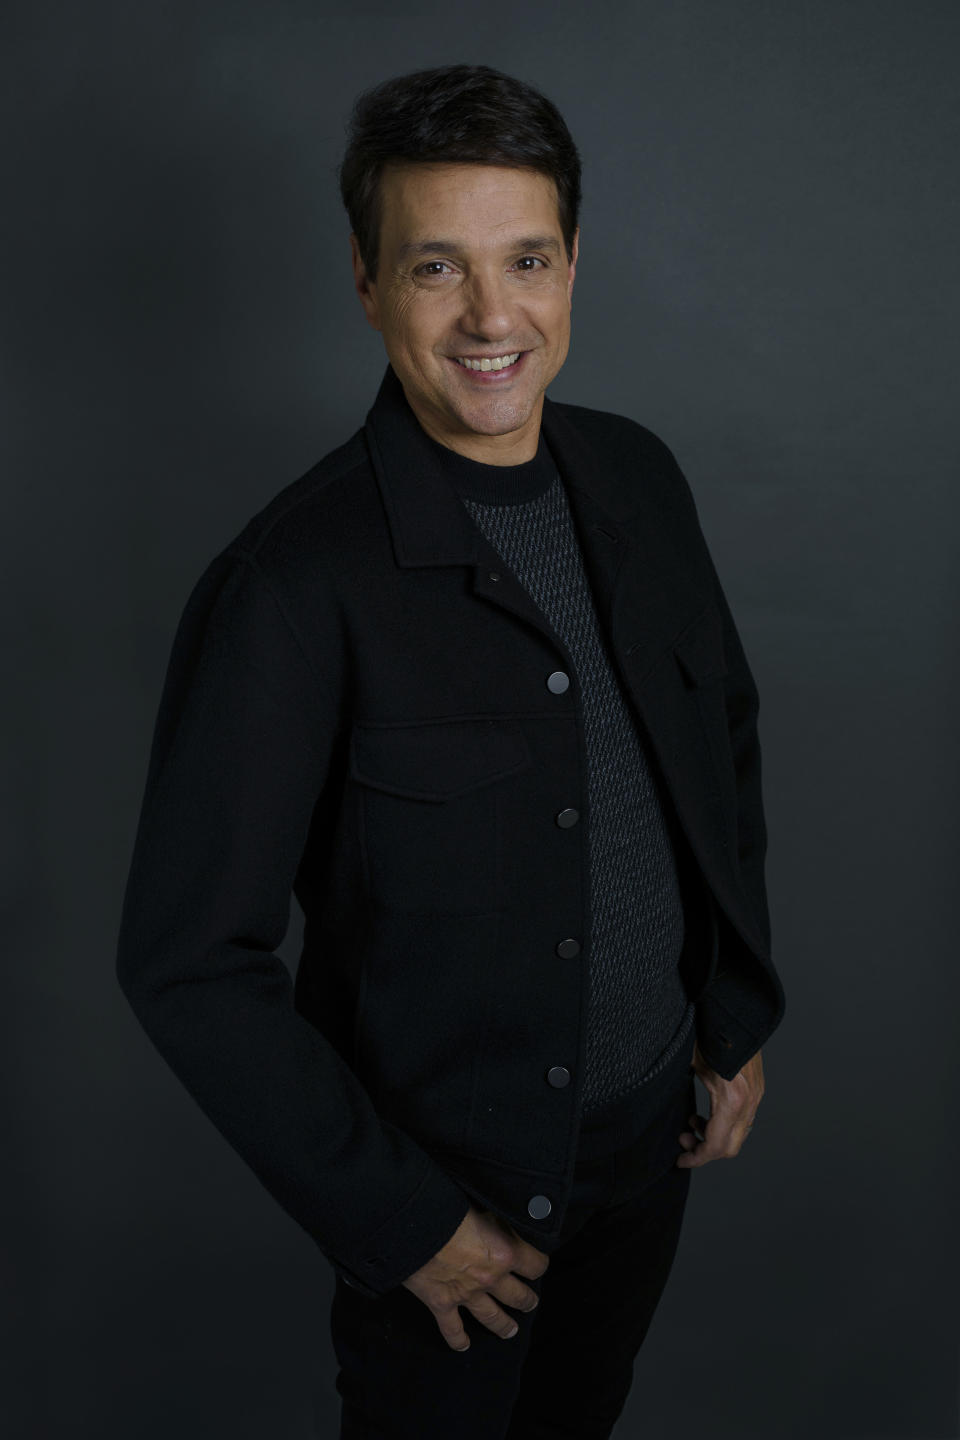 Actor Ralph Macchio poses for a portrait in New York on Oct. 4, 2022, to promote his memoir "Waxing On." (Photo by Christopher Smith/Invision/AP)